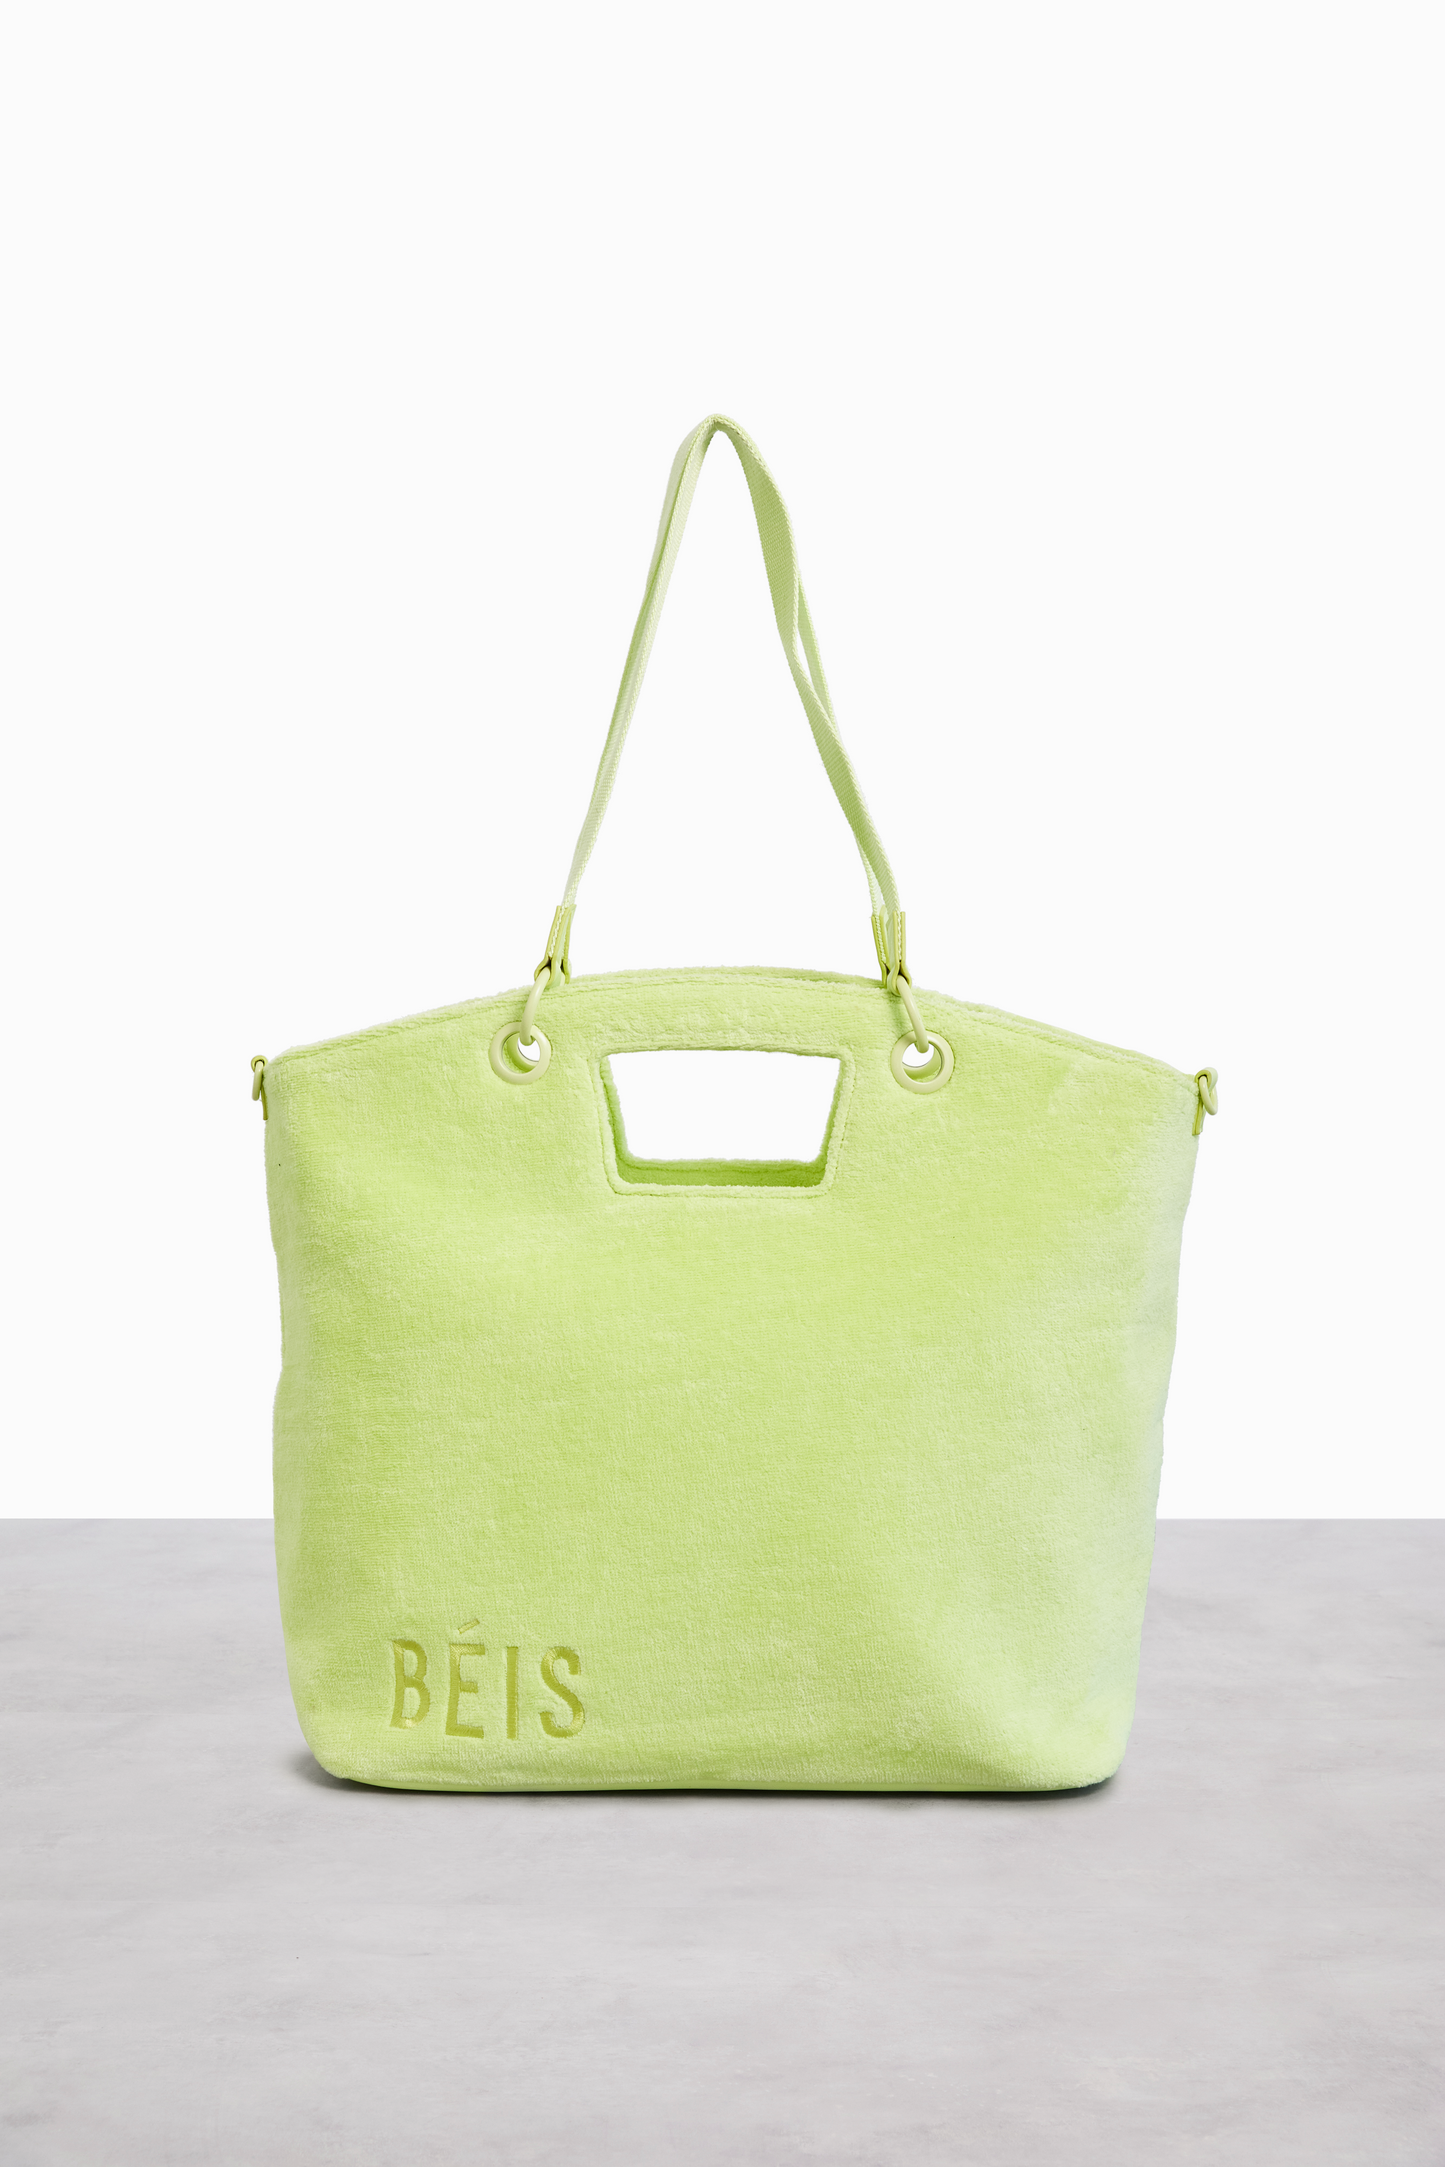 The Terry Tote in Citron